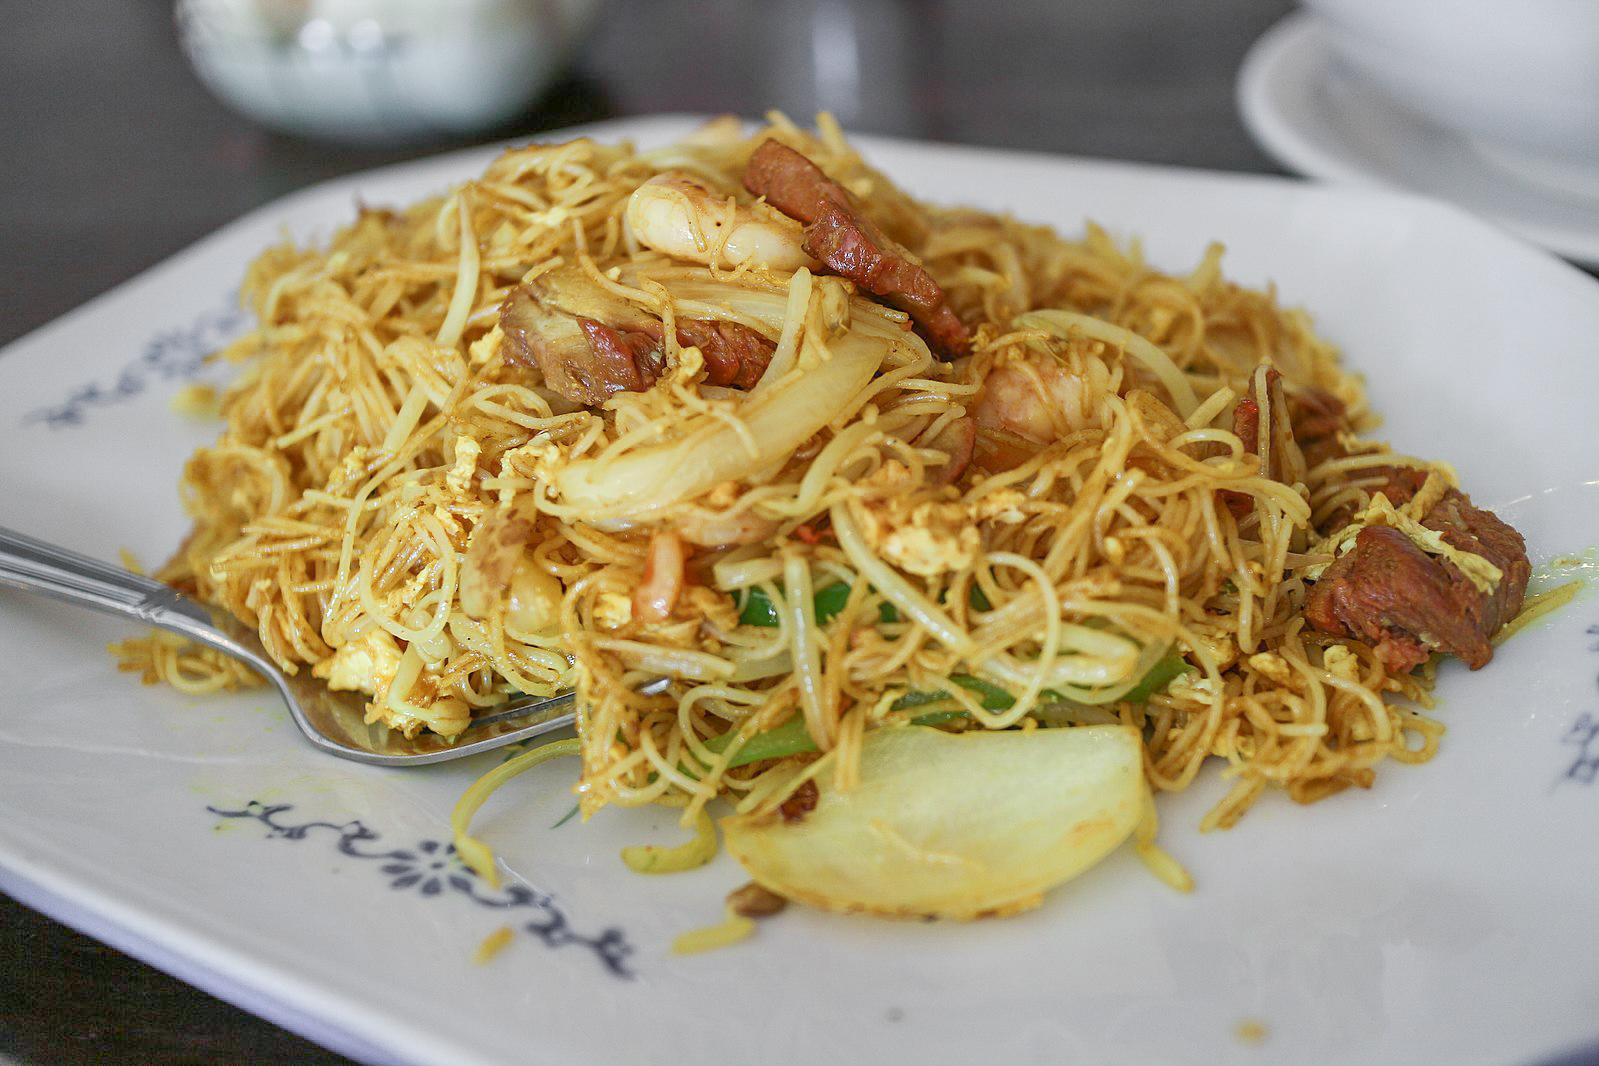 The Truth About Singapore Noodles: It’s Not From Singapore